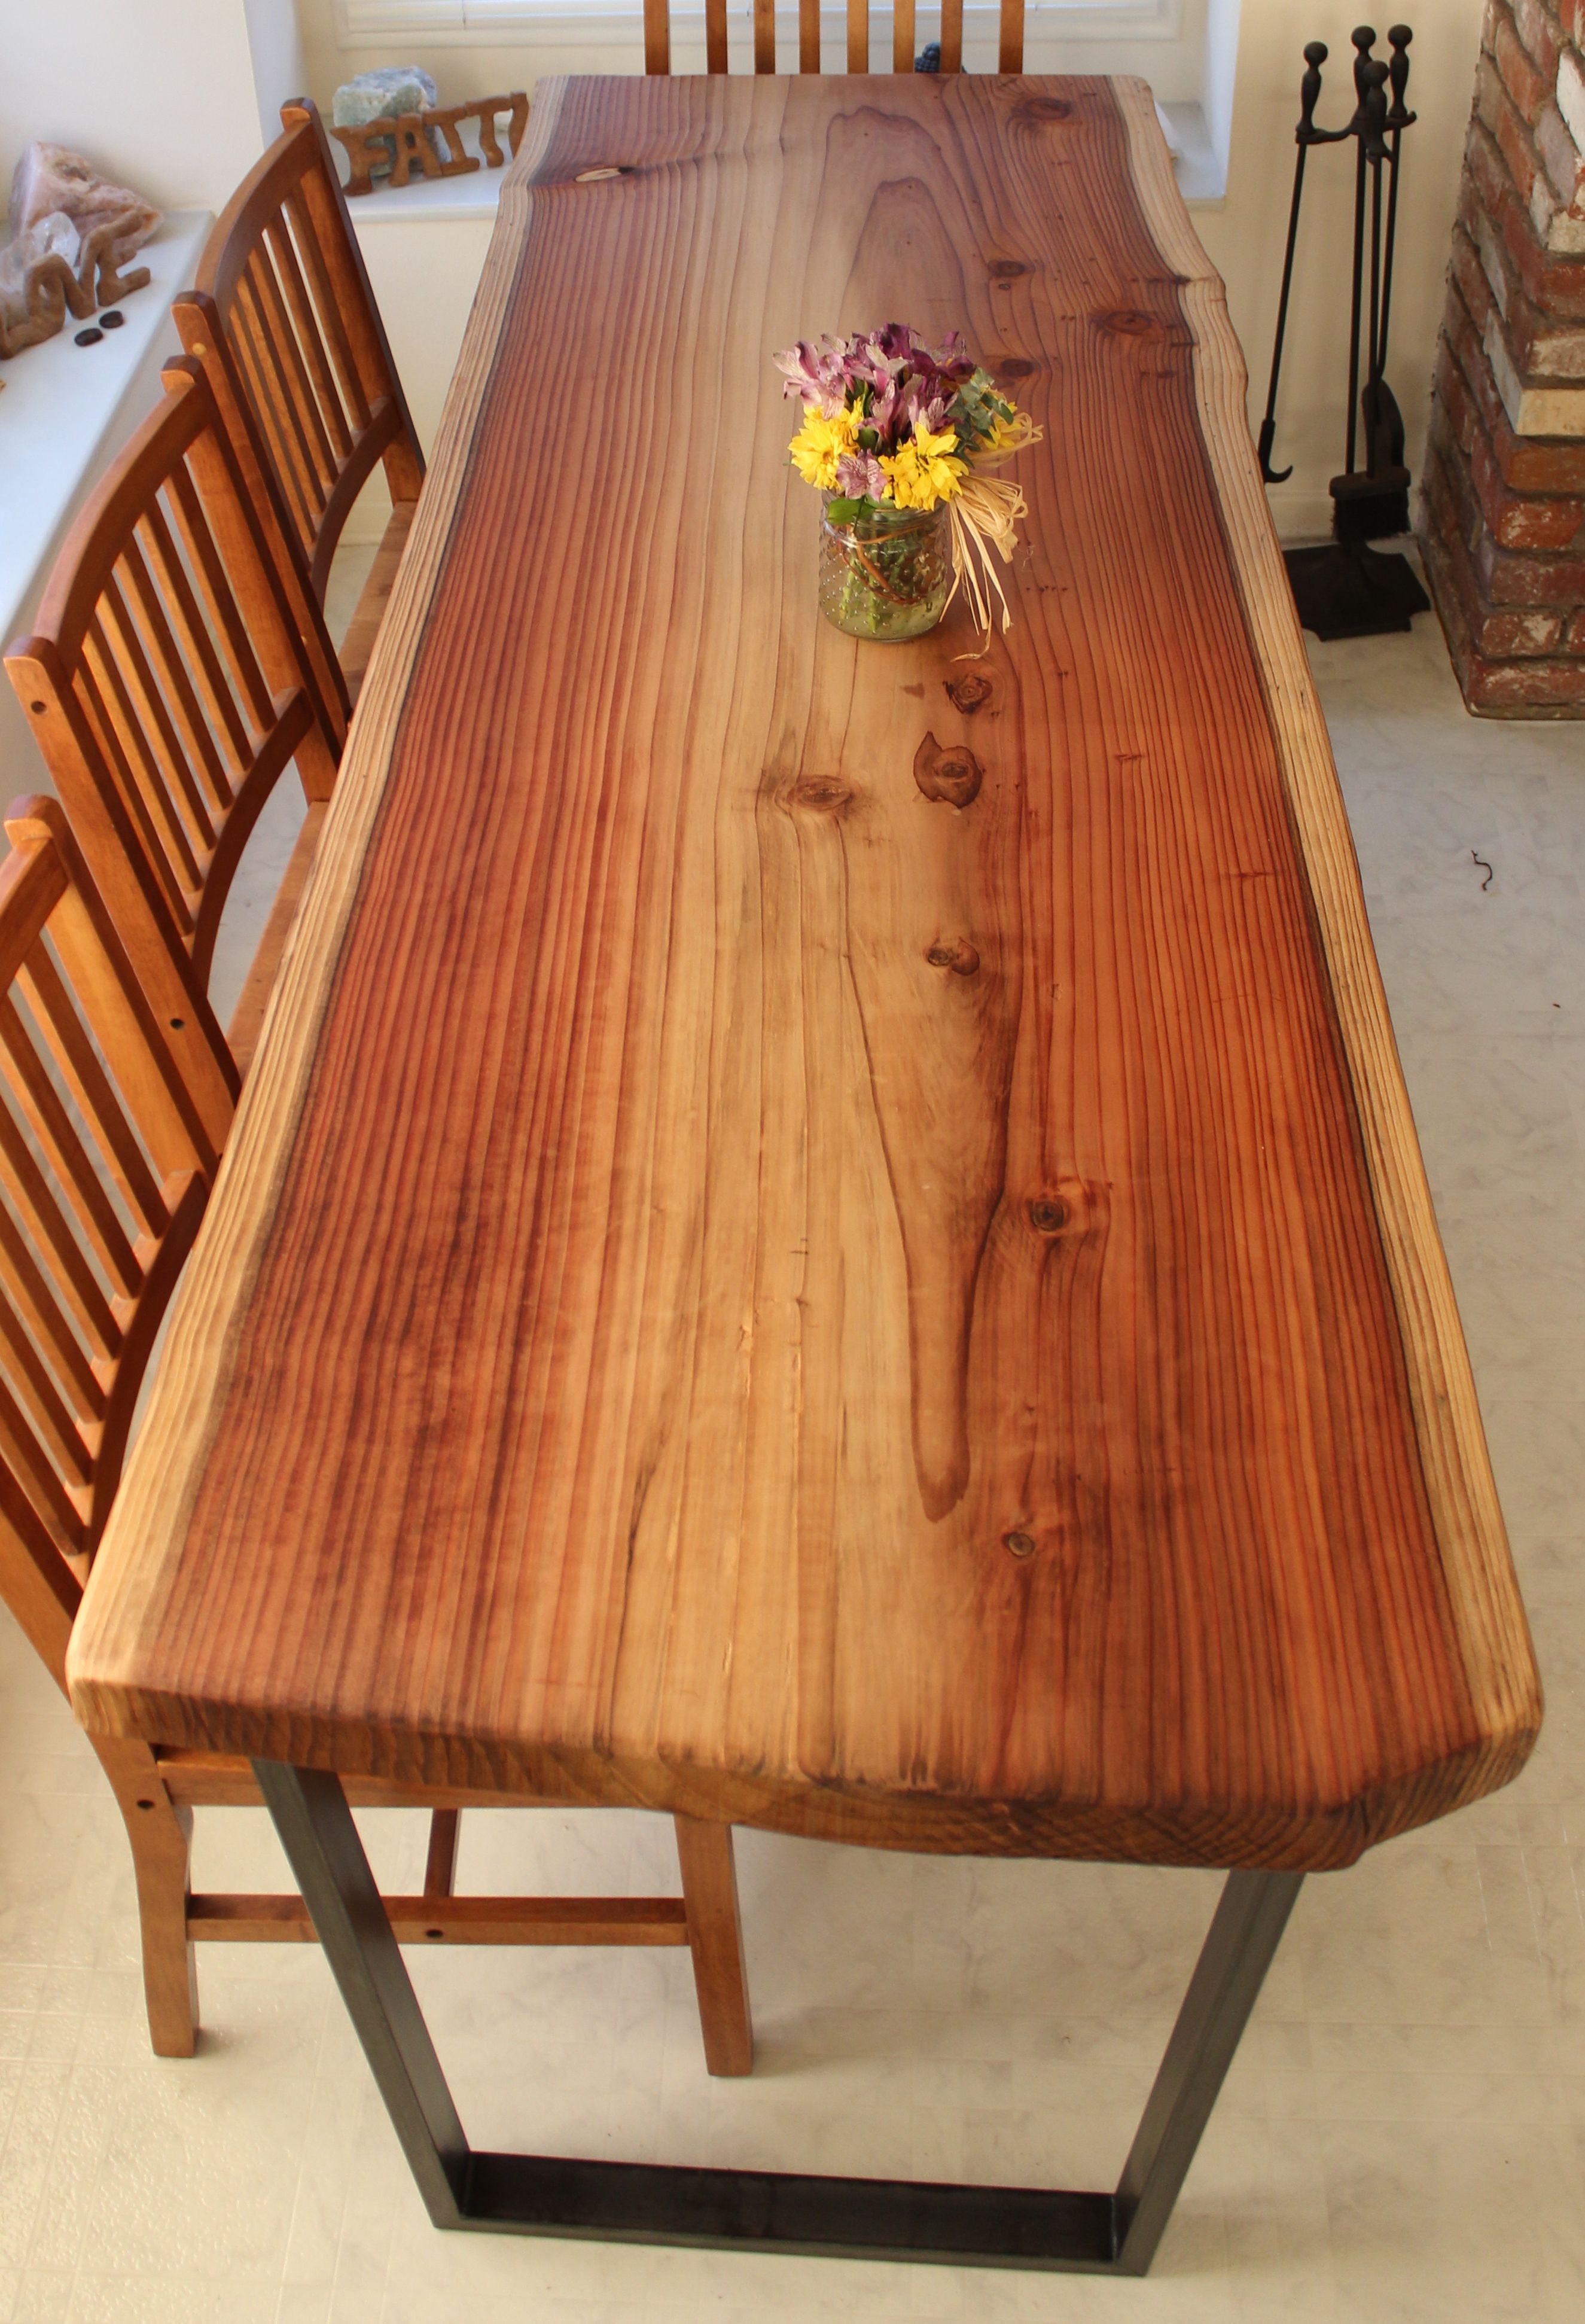 Hand Crafted Live Edge Dining Tables Redwood Featured With Steel Legs By Ipeace Artwork Custommadecom